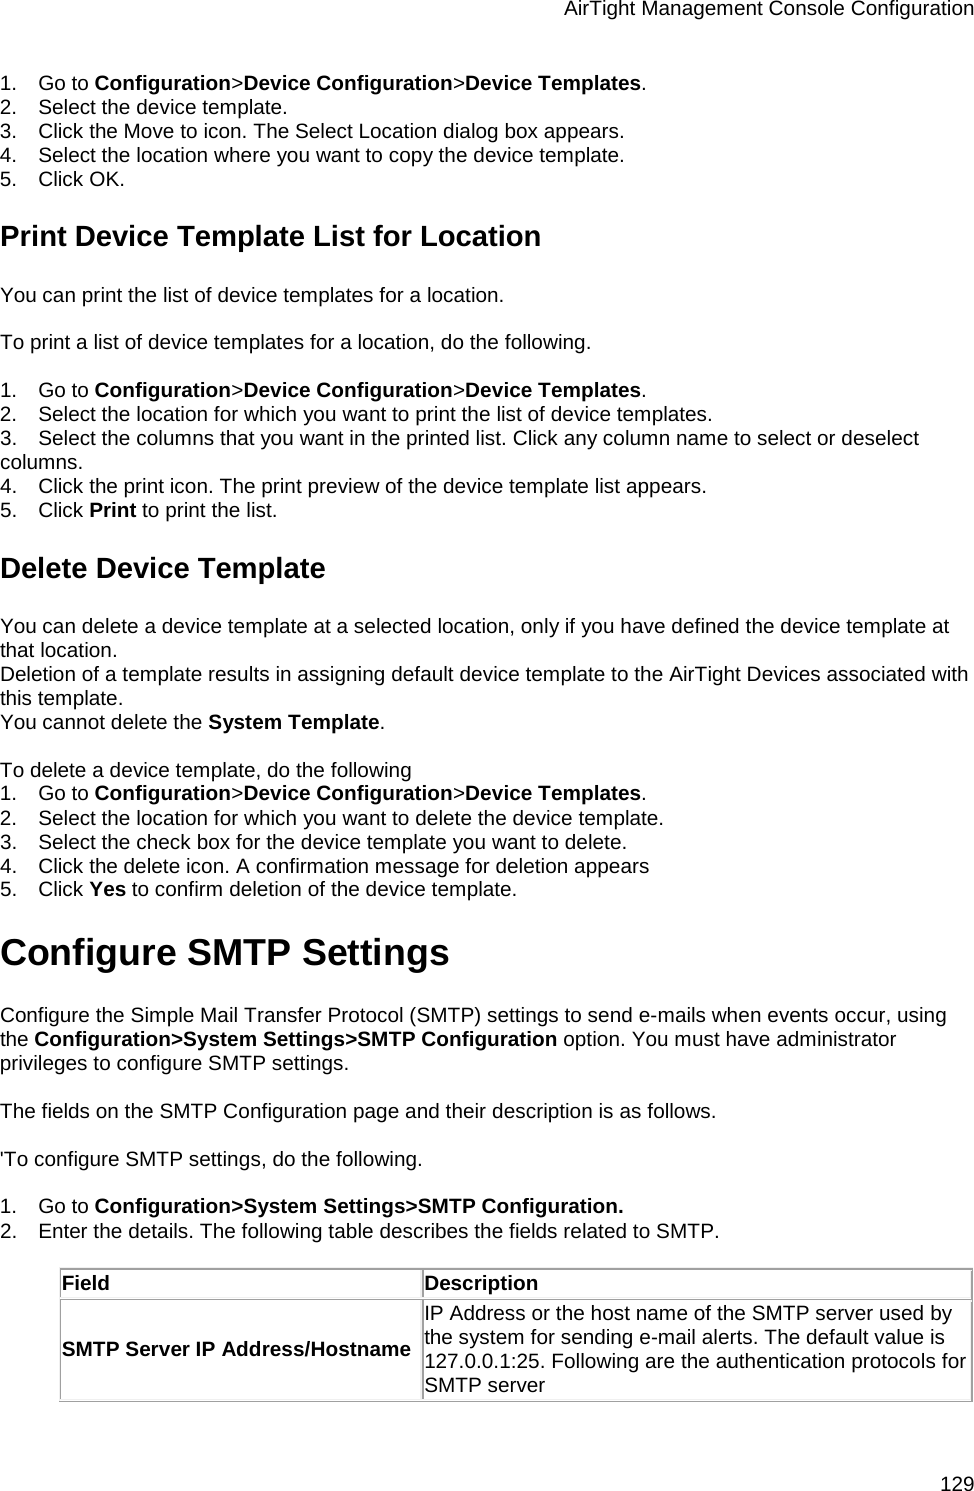 AirTight Management Console Configuration 129 1.      Go to Configuration&gt;Device Configuration&gt;Device Templates. 2.      Select the device template. 3.      Click the Move to icon. The Select Location dialog box appears. 4.      Select the location where you want to copy the device template. 5.      Click OK. Print Device Template List for Location You can print the list of device templates for a location.   To print a list of device templates for a location, do the following.   1.      Go to Configuration&gt;Device Configuration&gt;Device Templates. 2.      Select the location for which you want to print the list of device templates. 3.      Select the columns that you want in the printed list. Click any column name to select or deselect columns. 4.      Click the print icon. The print preview of the device template list appears. 5.      Click Print to print the list. Delete Device Template You can delete a device template at a selected location, only if you have defined the device template at that location.  Deletion of a template results in assigning default device template to the AirTight Devices associated with this template. You cannot delete the System Template.    To delete a device template, do the following 1.      Go to Configuration&gt;Device Configuration&gt;Device Templates. 2.      Select the location for which you want to delete the device template. 3.      Select the check box for the device template you want to delete. 4.      Click the delete icon. A confirmation message for deletion appears 5.      Click Yes to confirm deletion of the device template. Configure SMTP Settings Configure the Simple Mail Transfer Protocol (SMTP) settings to send e-mails when events occur, using the Configuration&gt;System Settings&gt;SMTP Configuration option. You must have administrator privileges to configure SMTP settings.   The fields on the SMTP Configuration page and their description is as follows.   &apos;To configure SMTP settings, do the following.   1.      Go to Configuration&gt;System Settings&gt;SMTP Configuration. 2.      Enter the details. The following table describes the fields related to SMTP.   Field Description SMTP Server IP Address/Hostname IP Address or the host name of the SMTP server used by the system for sending e-mail alerts. The default value is 127.0.0.1:25. Following are the authentication protocols for SMTP server 